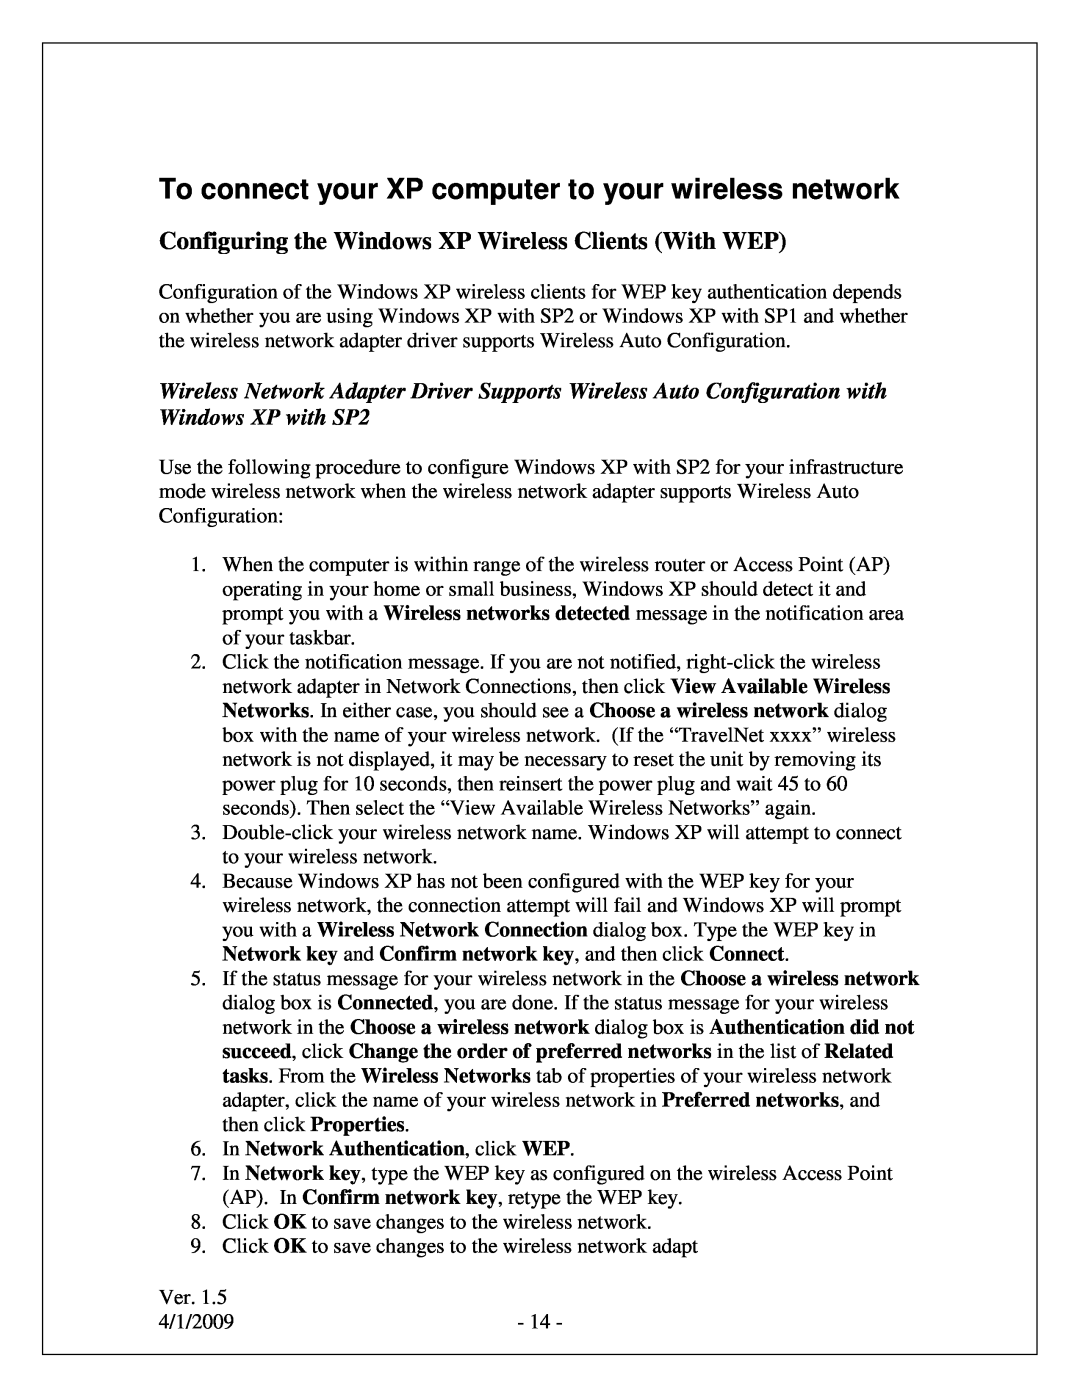 Winegard TN-2055, TN-2033 To connect your XP computer to your wireless network, In Network Authentication, click WEP 